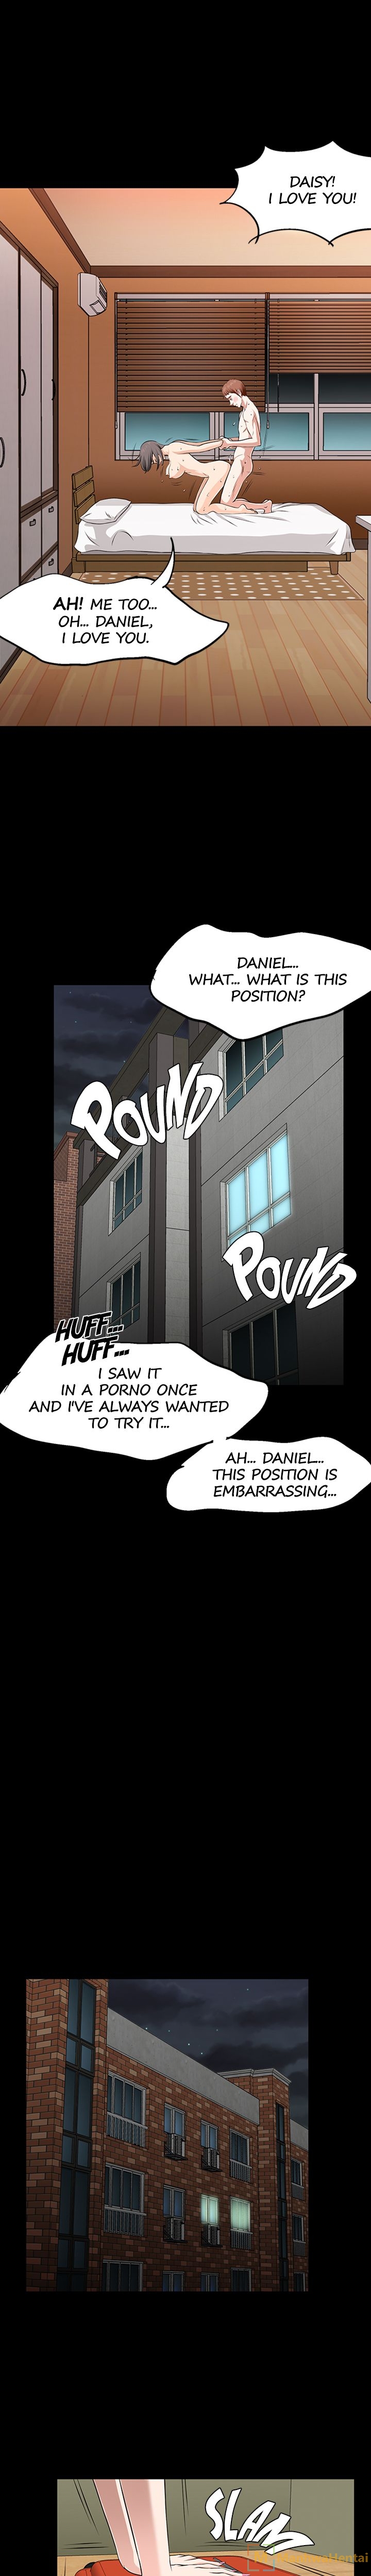 Roomie - Chapter 37 Page 12